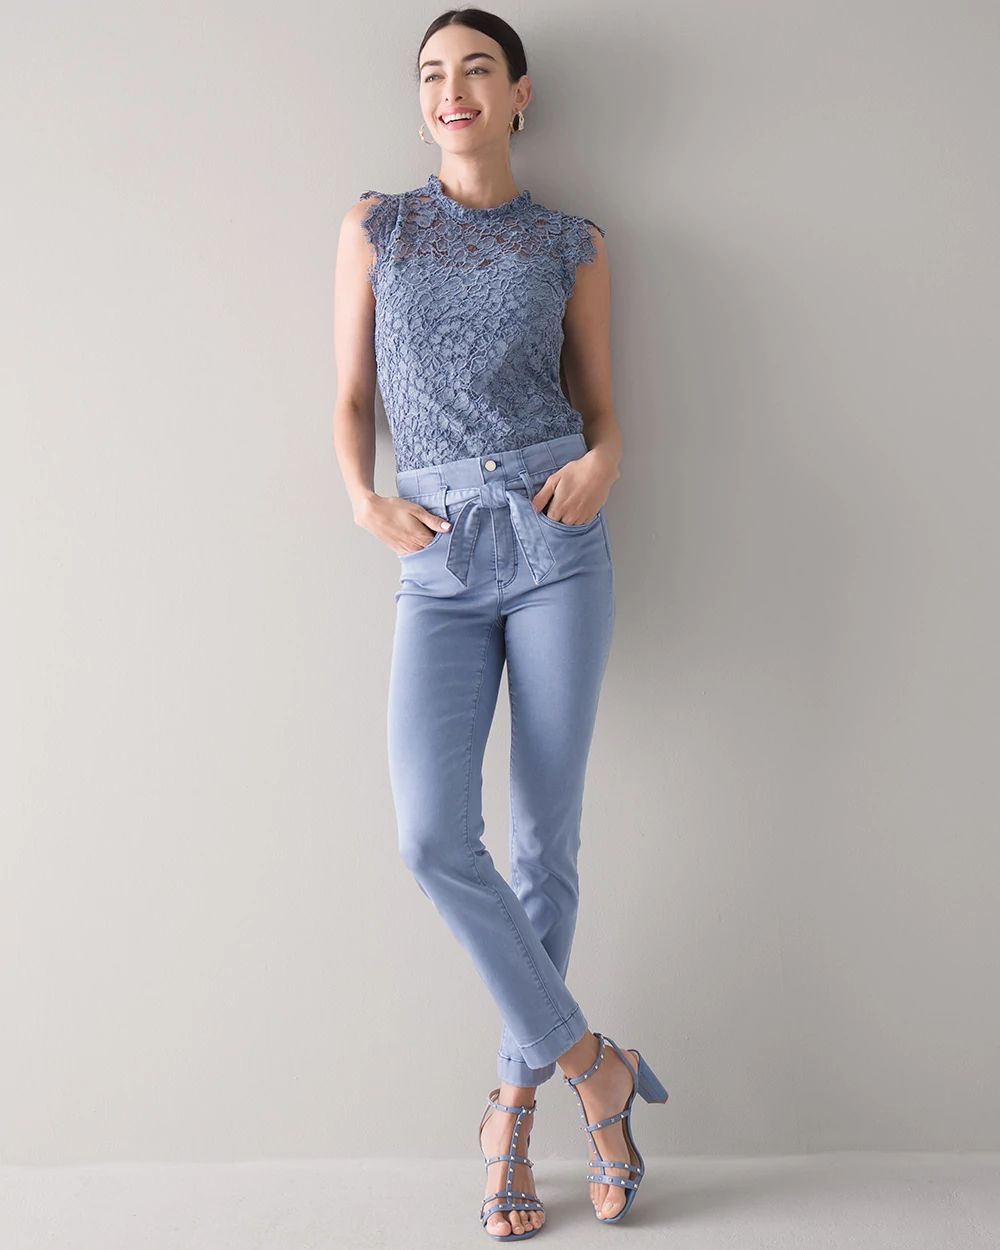 High-Rise Everyday Soft Denim™ Corset Slim Crop Jeans click to view larger image.